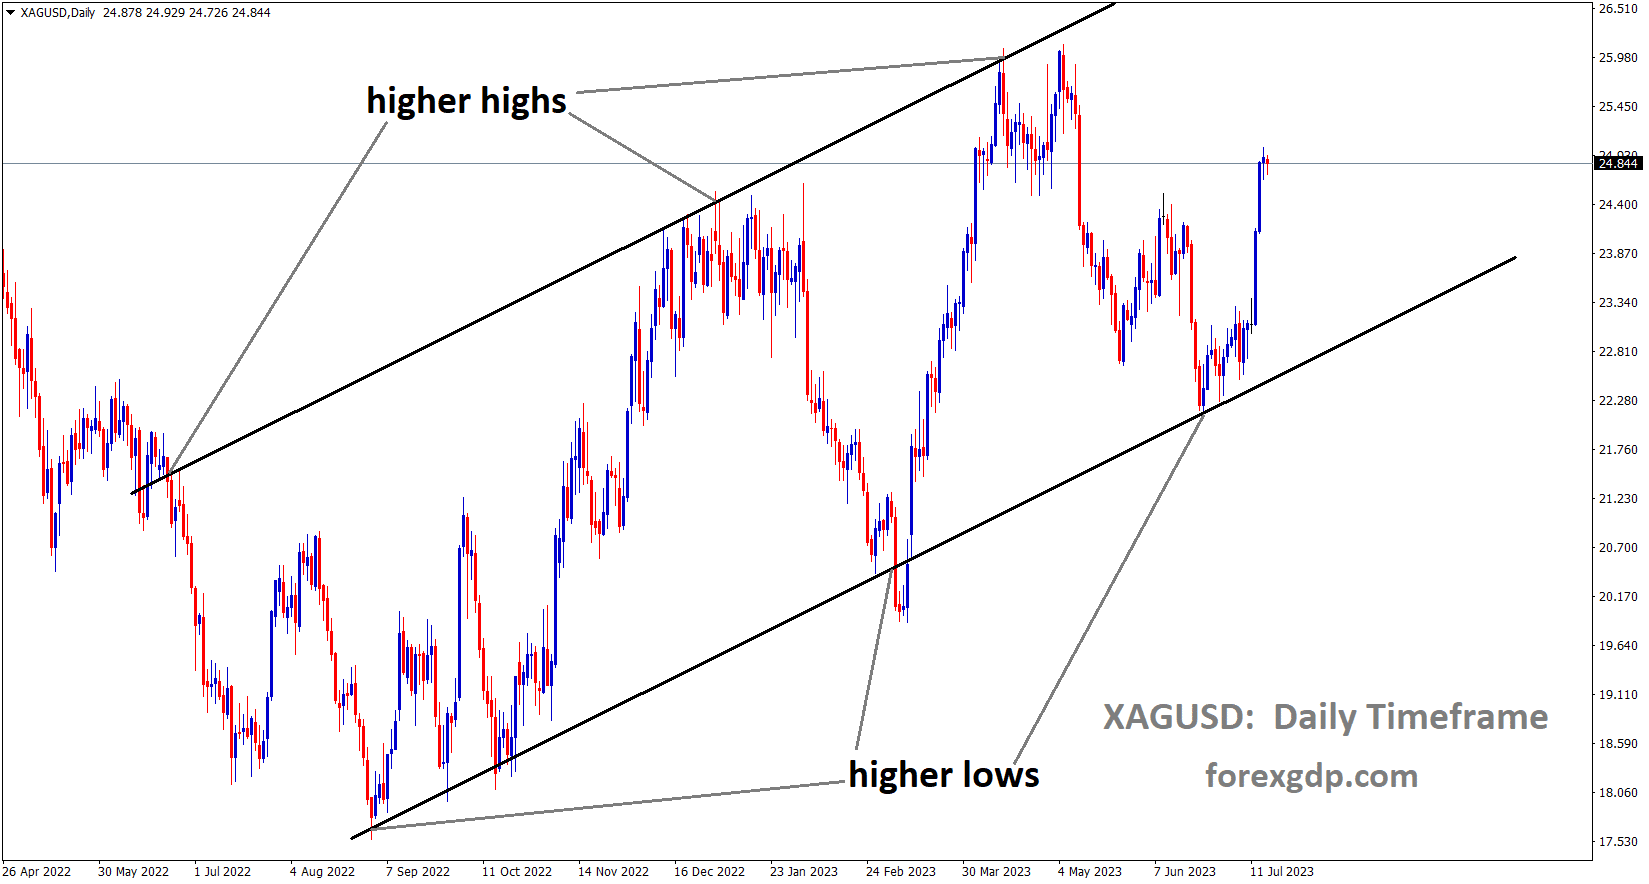 XAGUSD Silver Price is moving in an Ascending channel and the market has rebounded from the higher low area of the channel